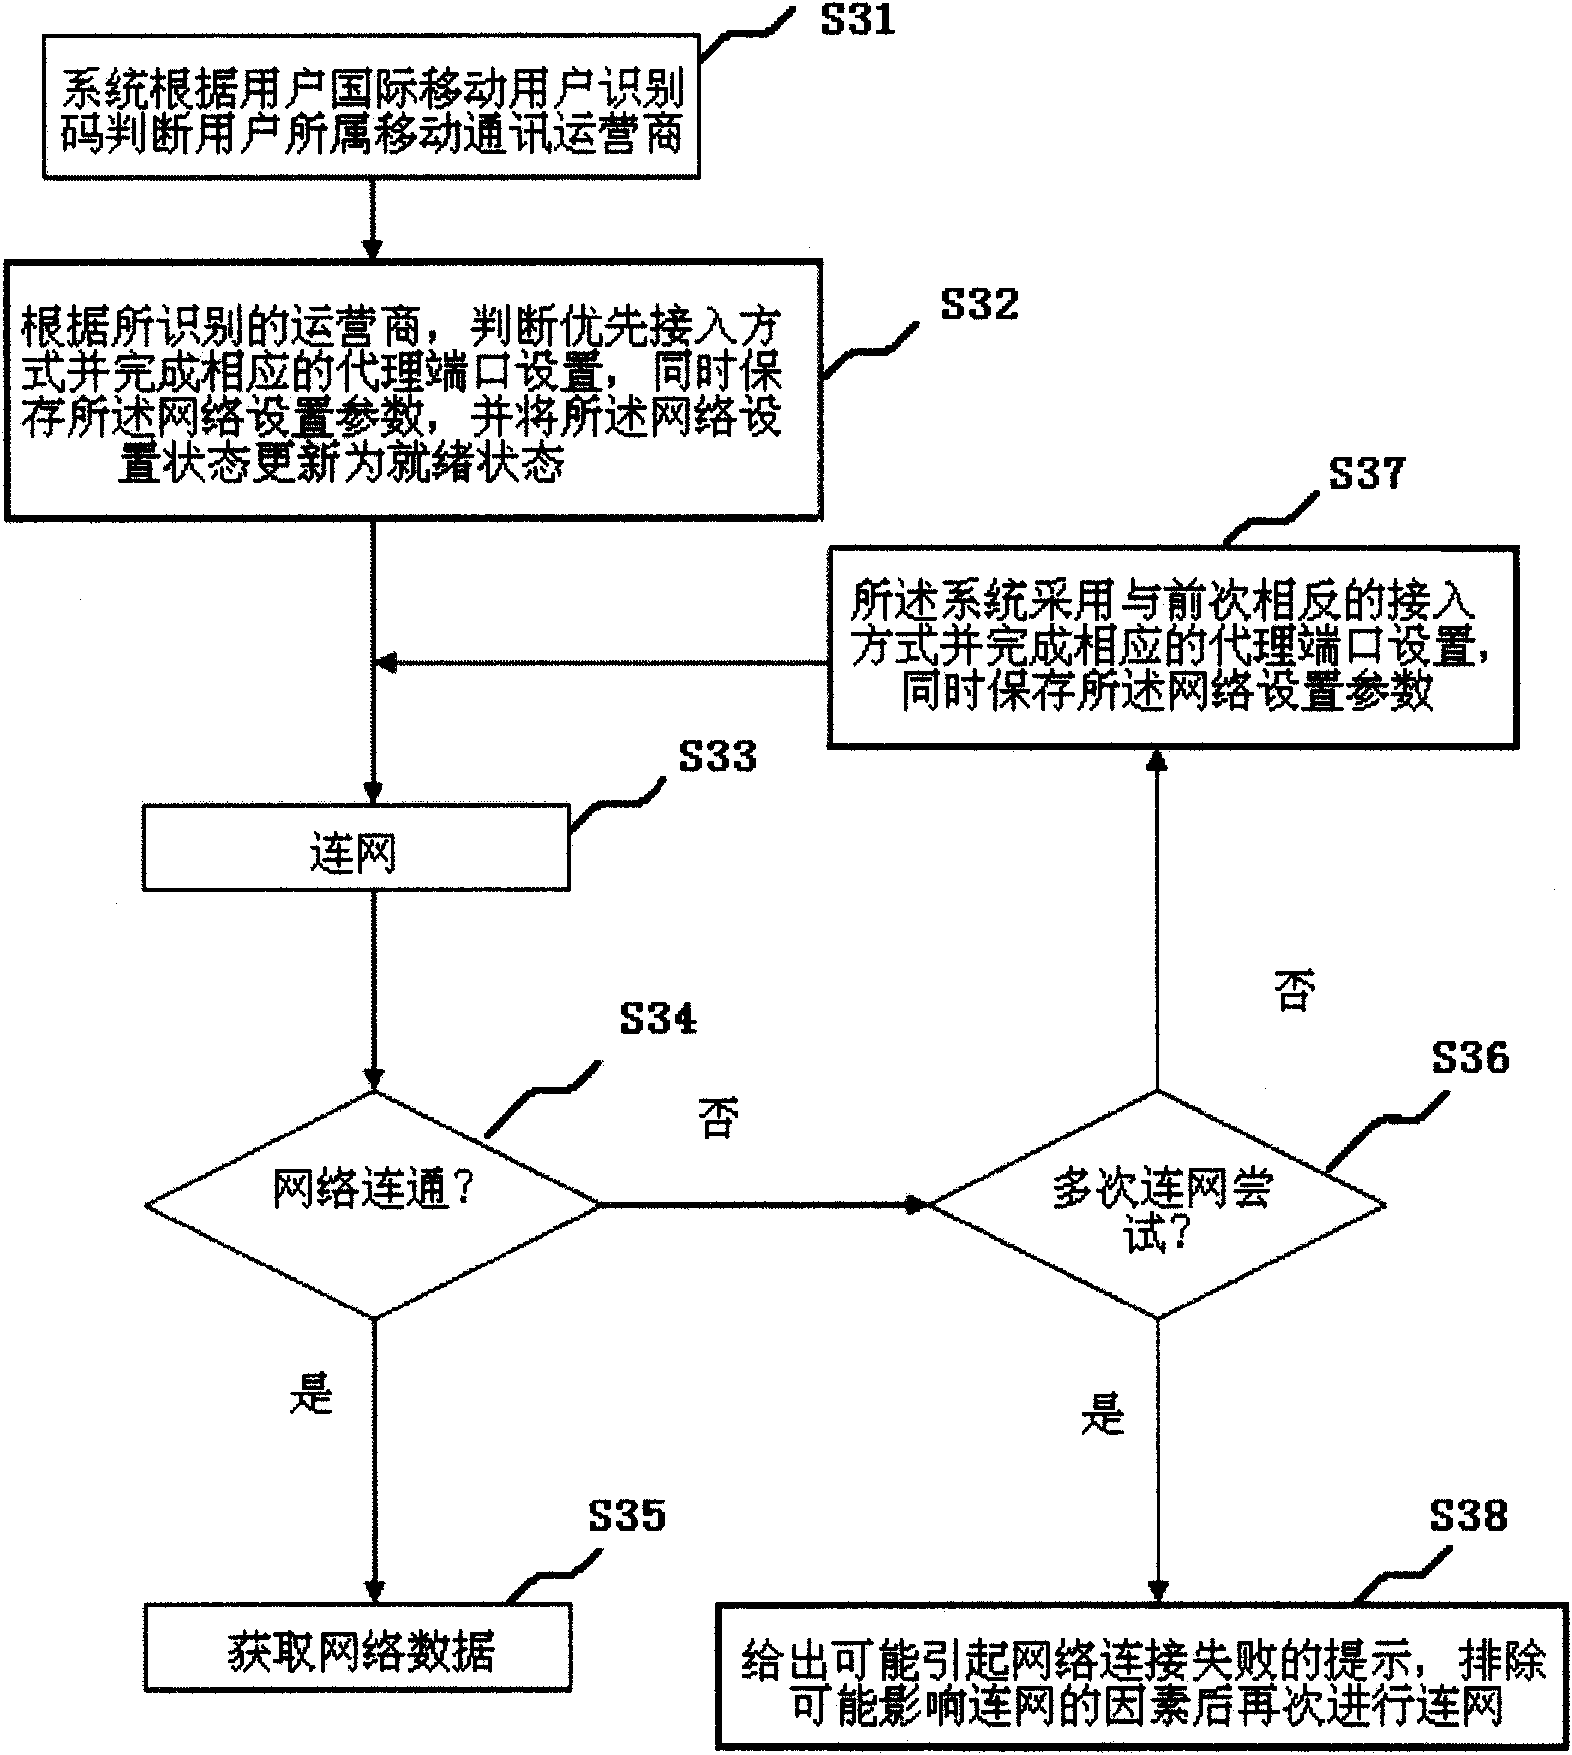 Internet access method based on mobile communication equipment terminals